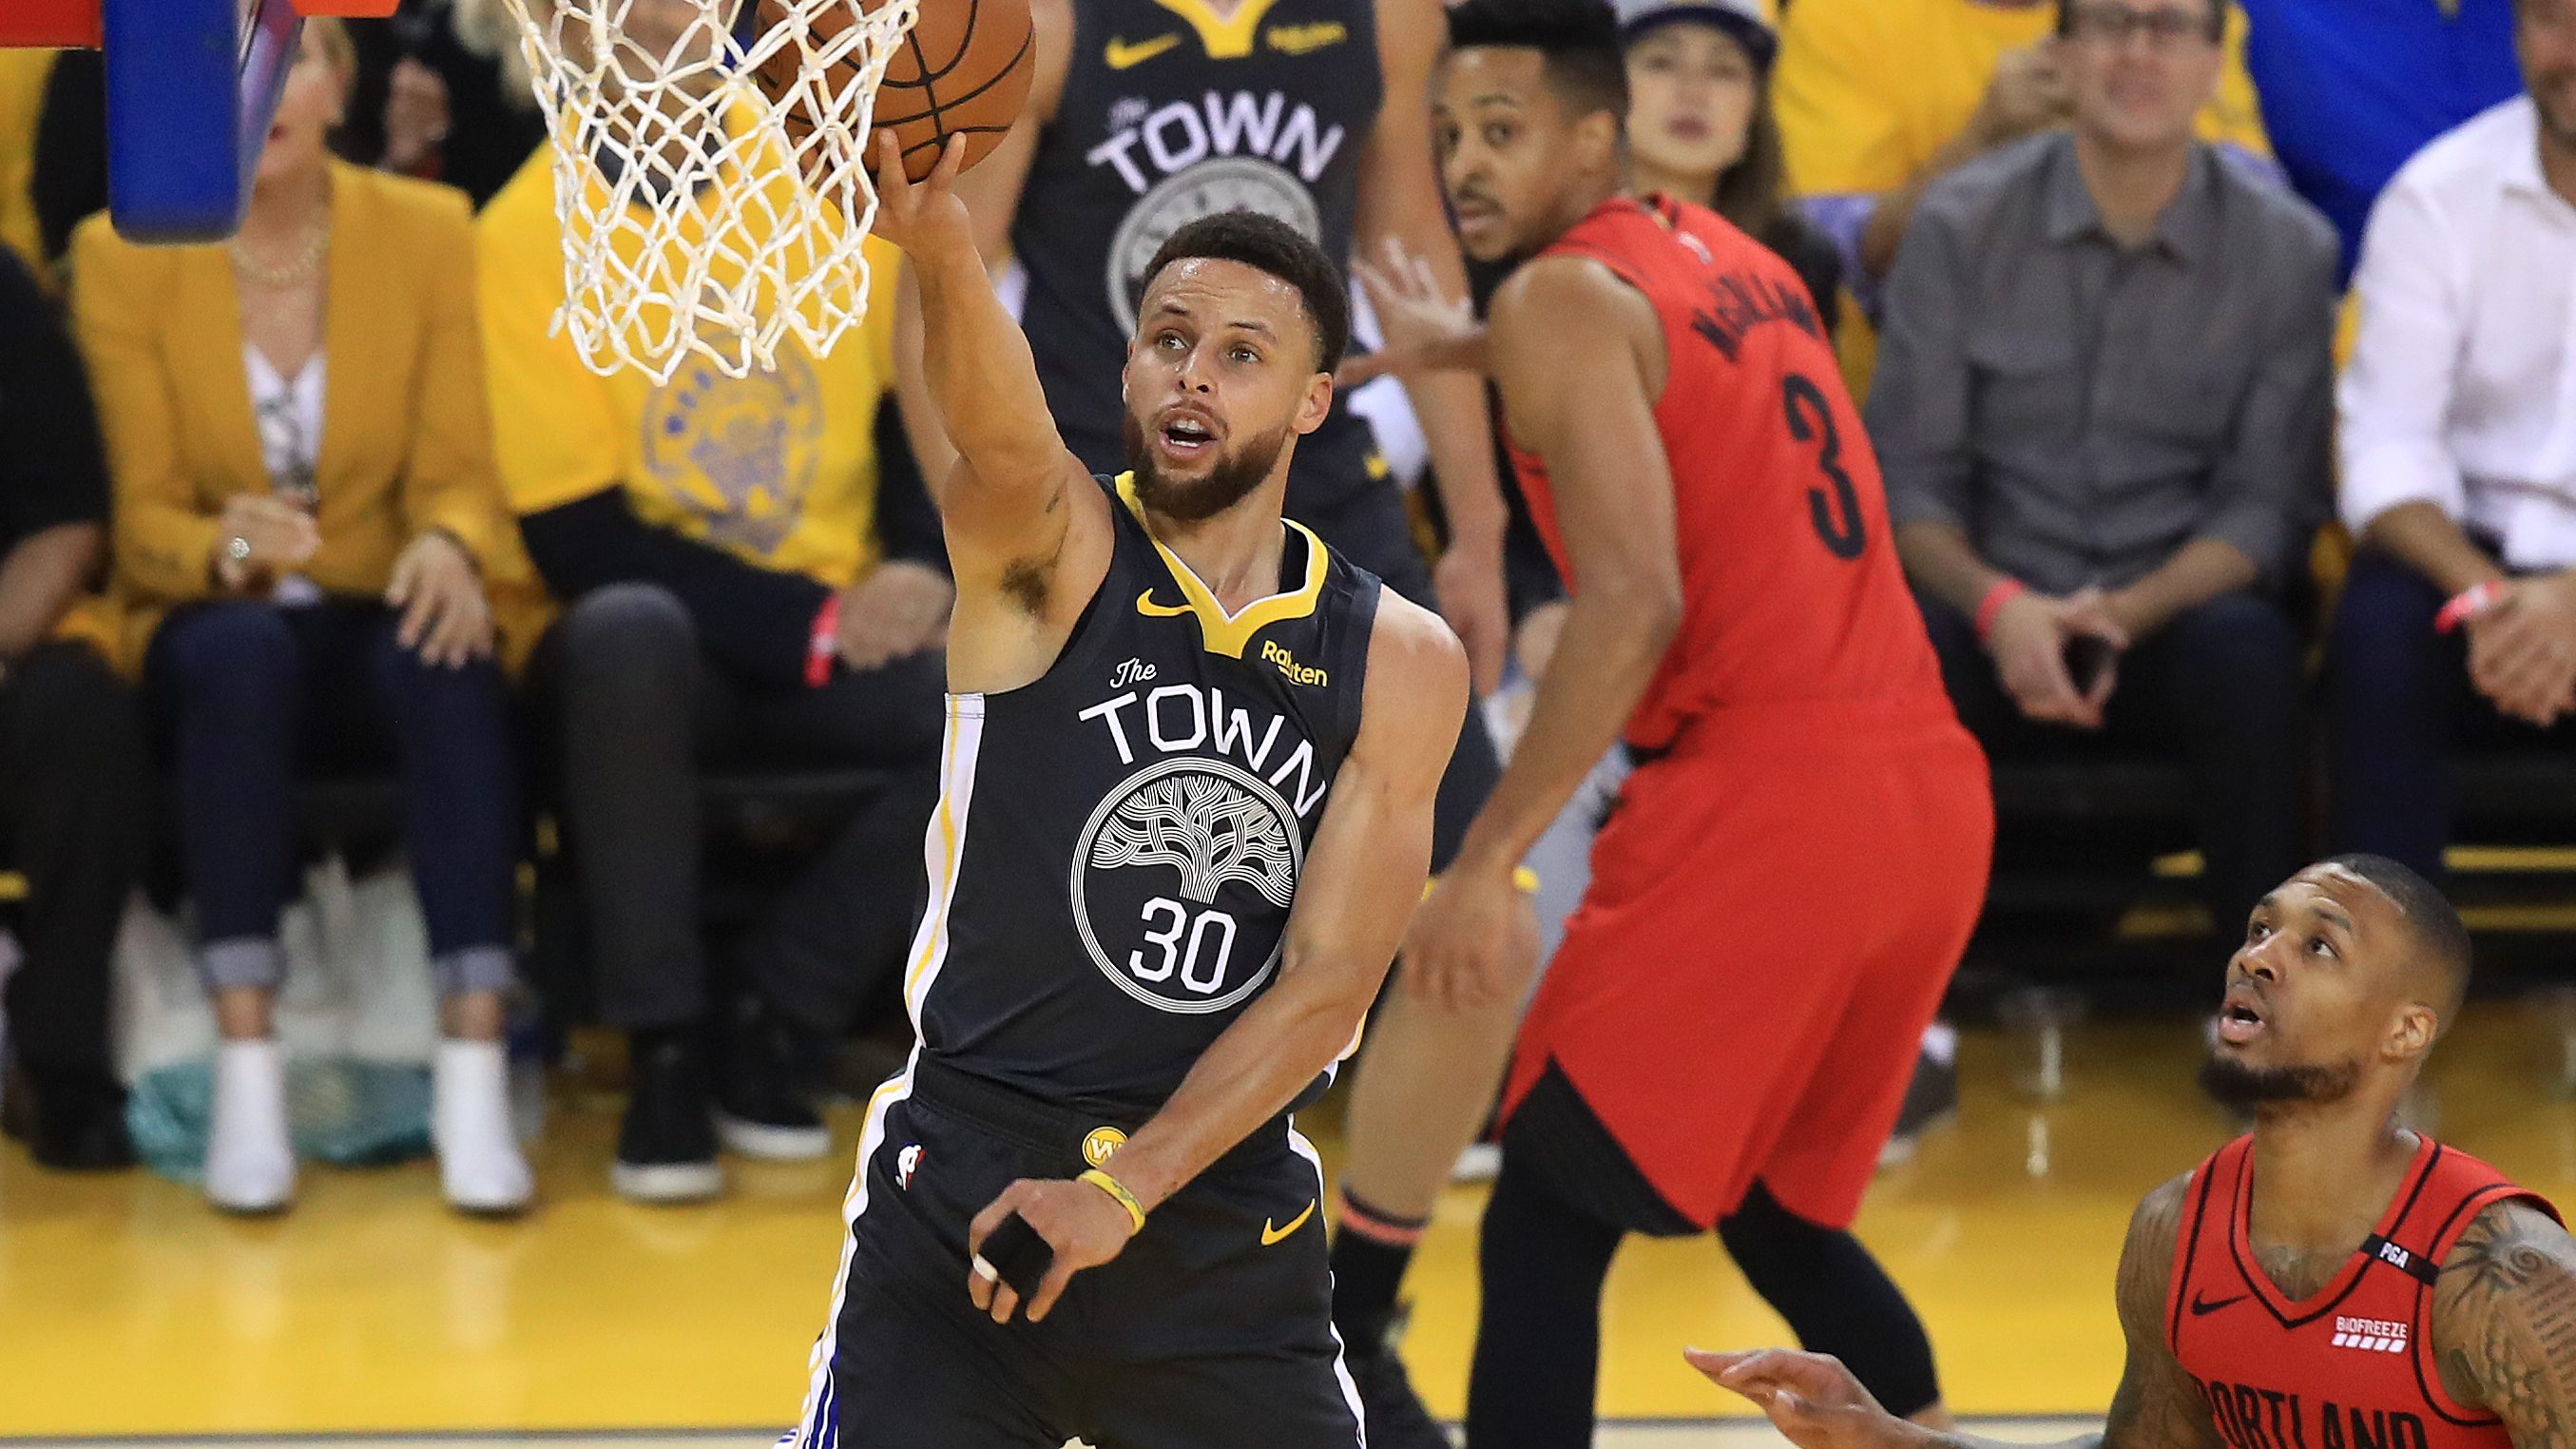 Warriors 'The Town' Jerseys: What It 